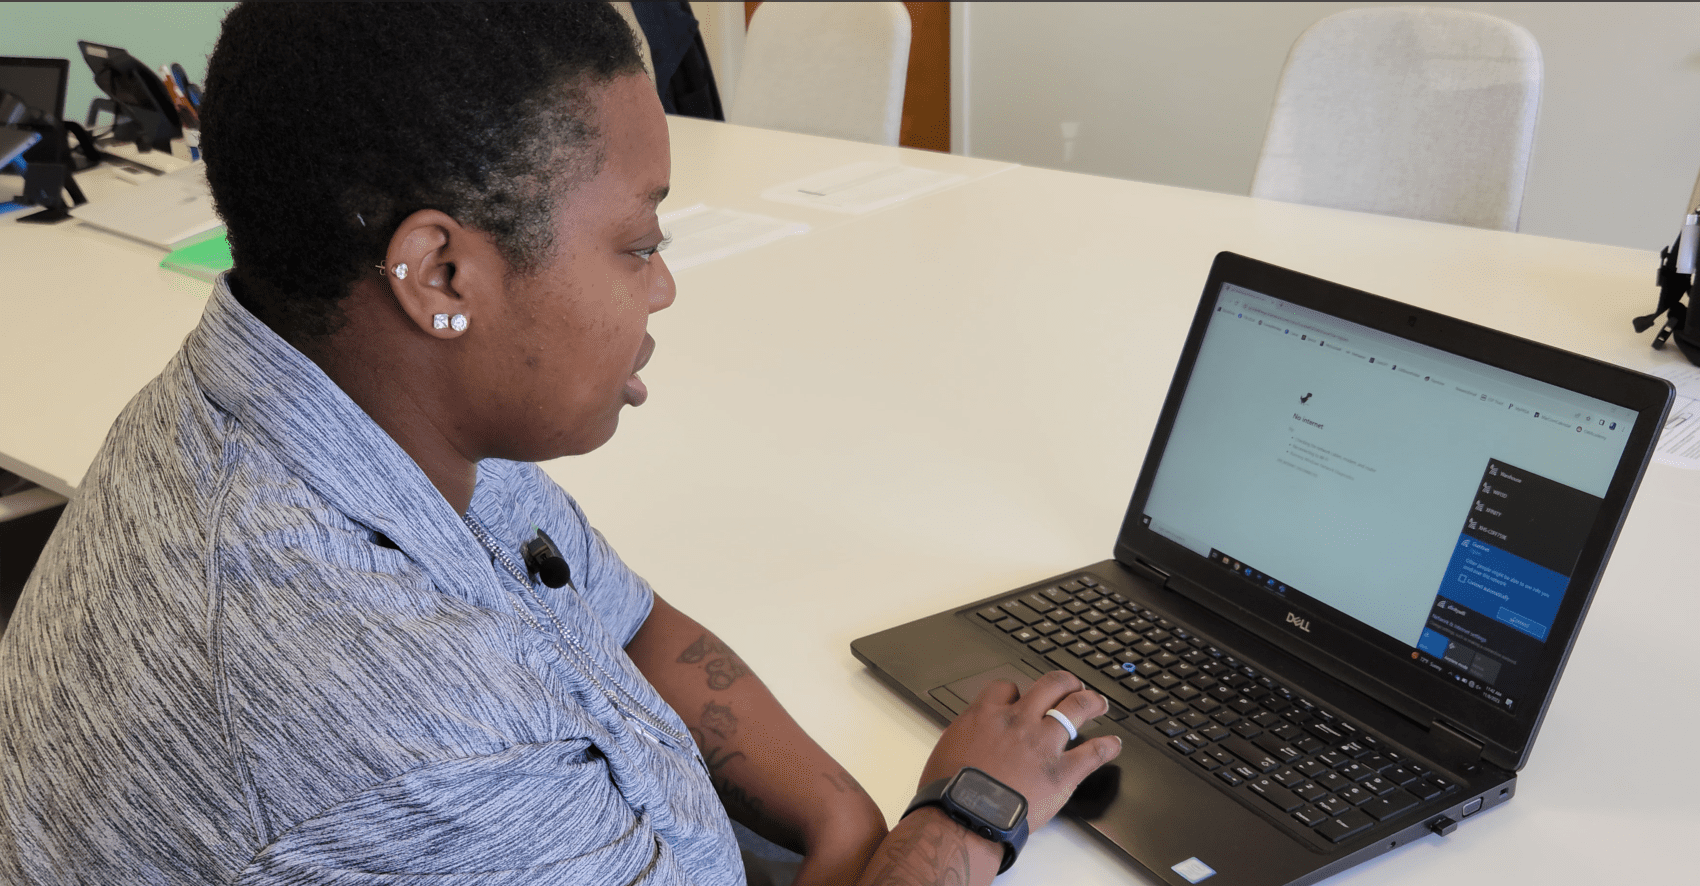 Tahitia works to restore the Wi-Fi connection on a laptop inside Goodwill Southeast Georgia's ReFactory office.